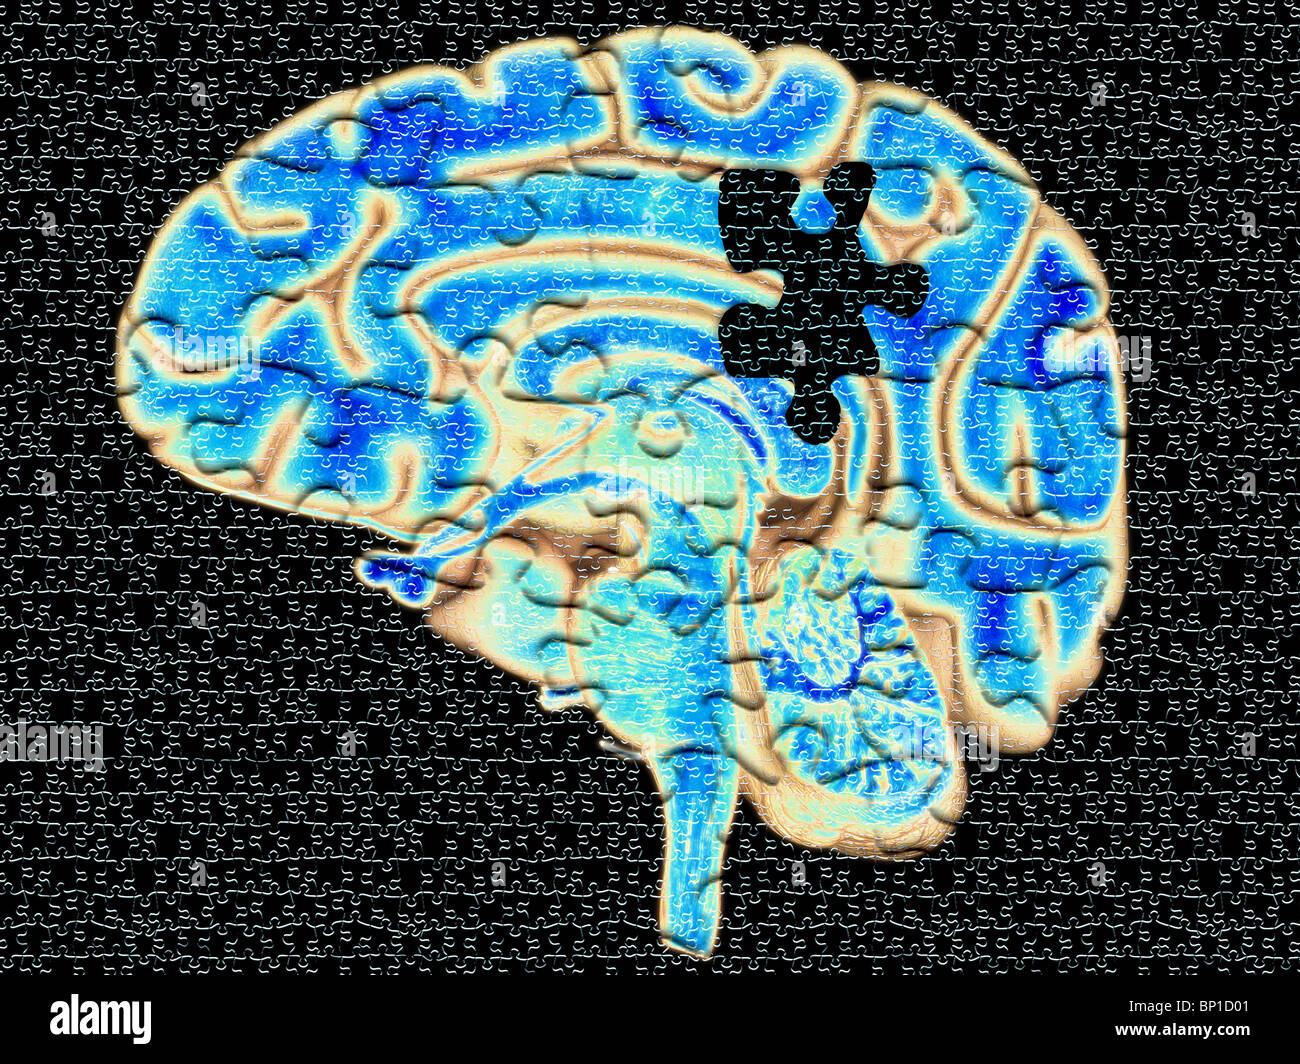 conceptual illustration of the human brain as a puzzle or enigma Stock Photo